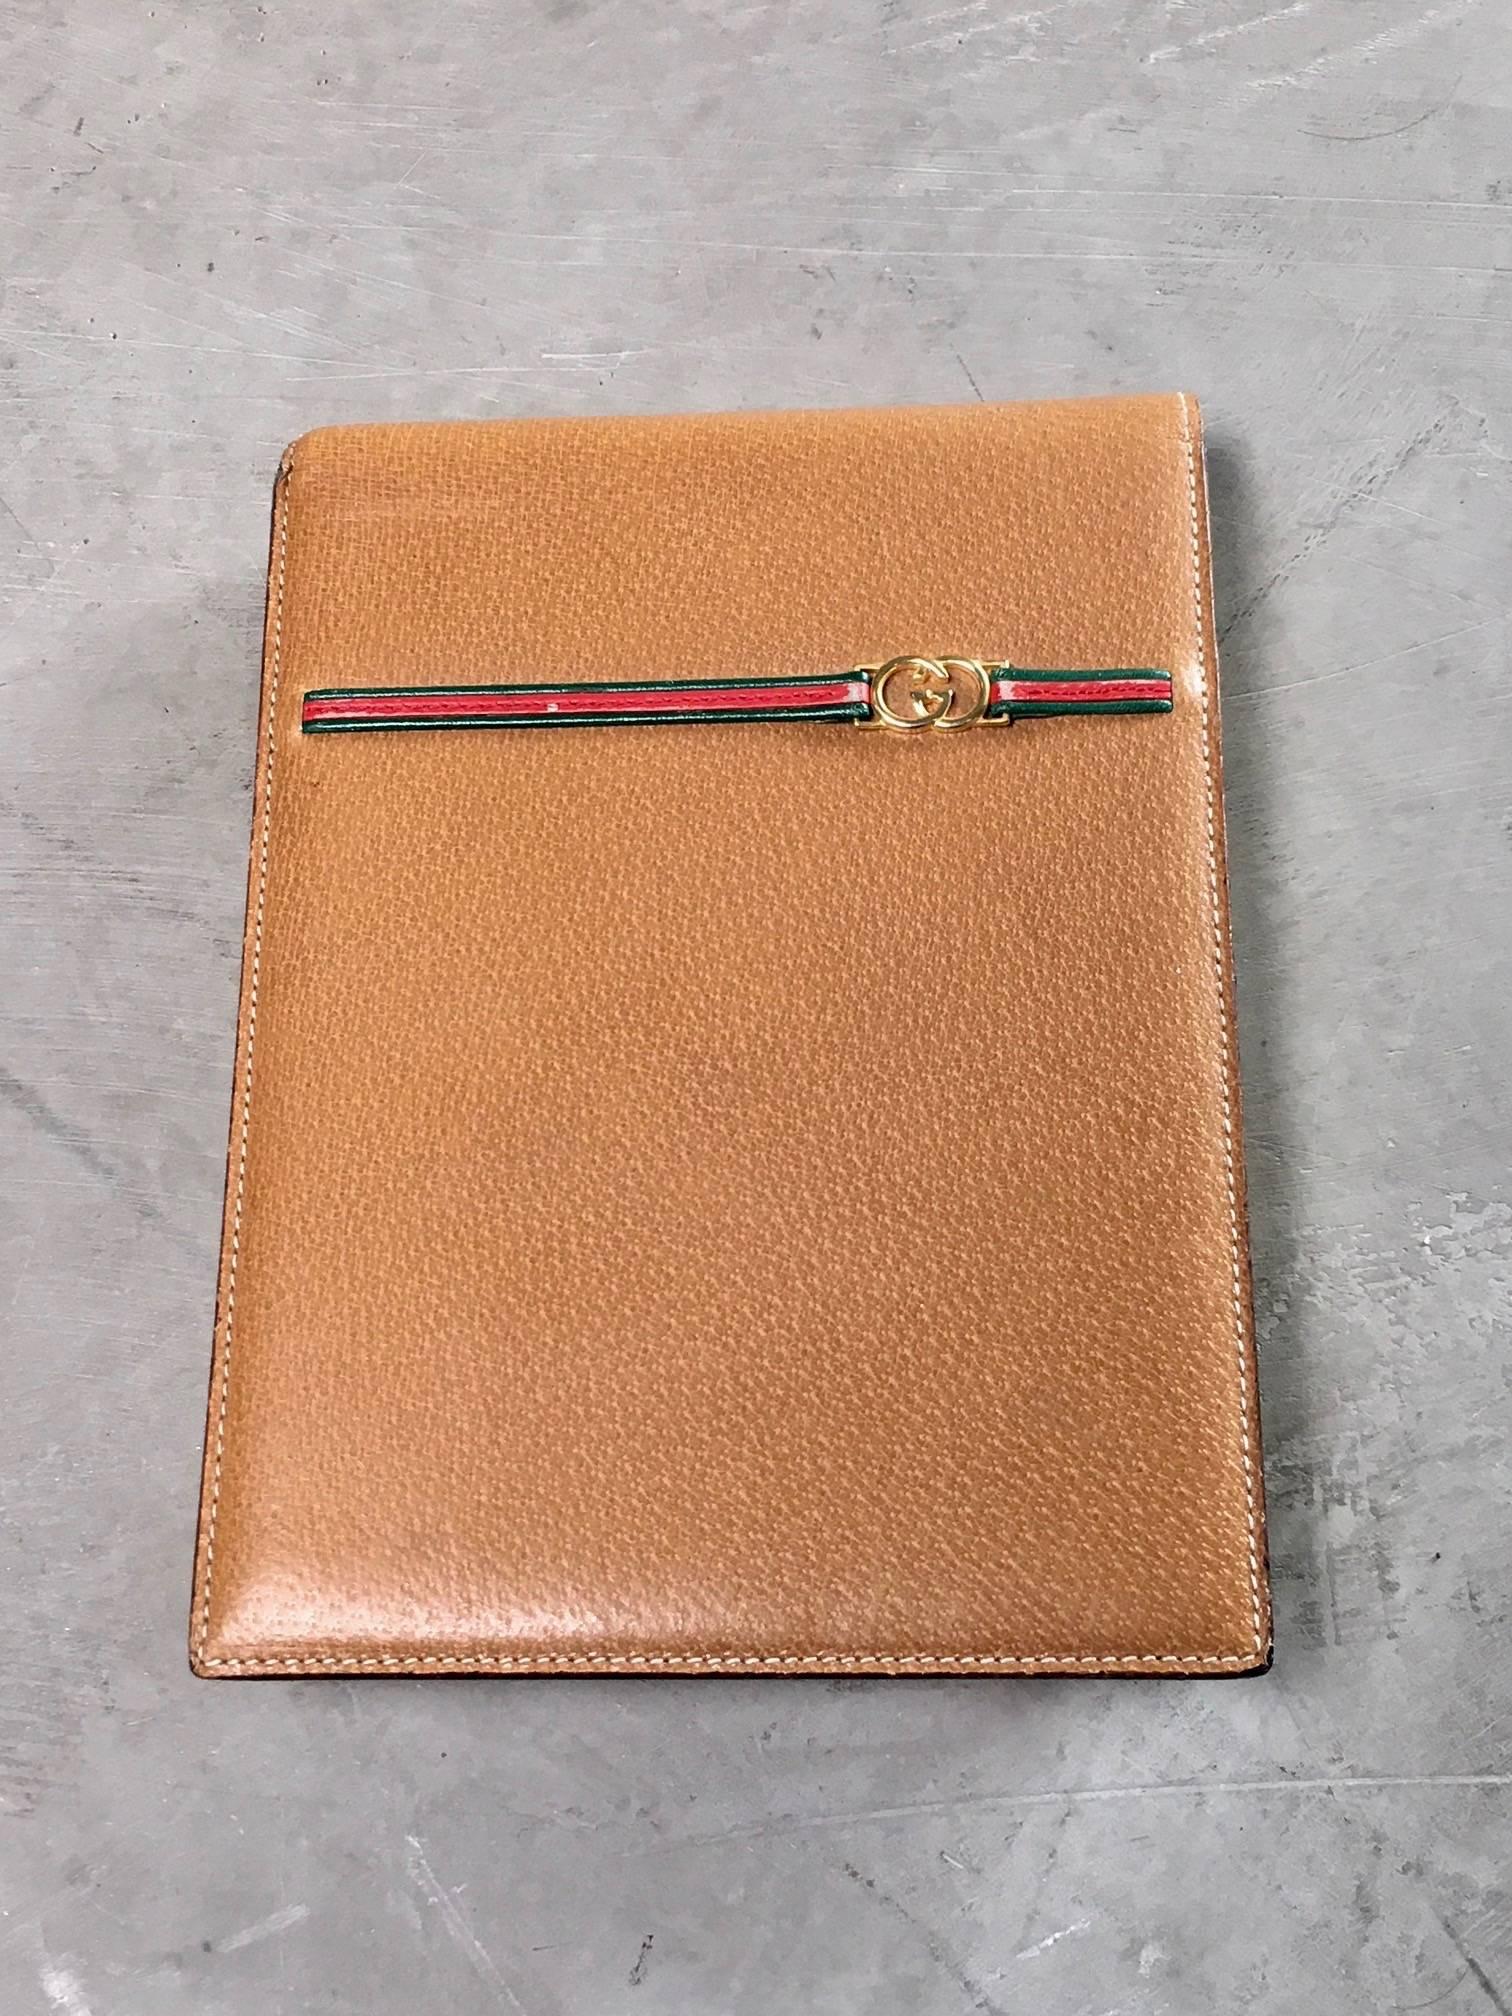 Handsome vintage tan leather Gucci notepad with red and green stripes and GG logo. Green leather back. Excellent patina to leather. Original, hardly used notepad inside. Great piece for the desktop or on the go.